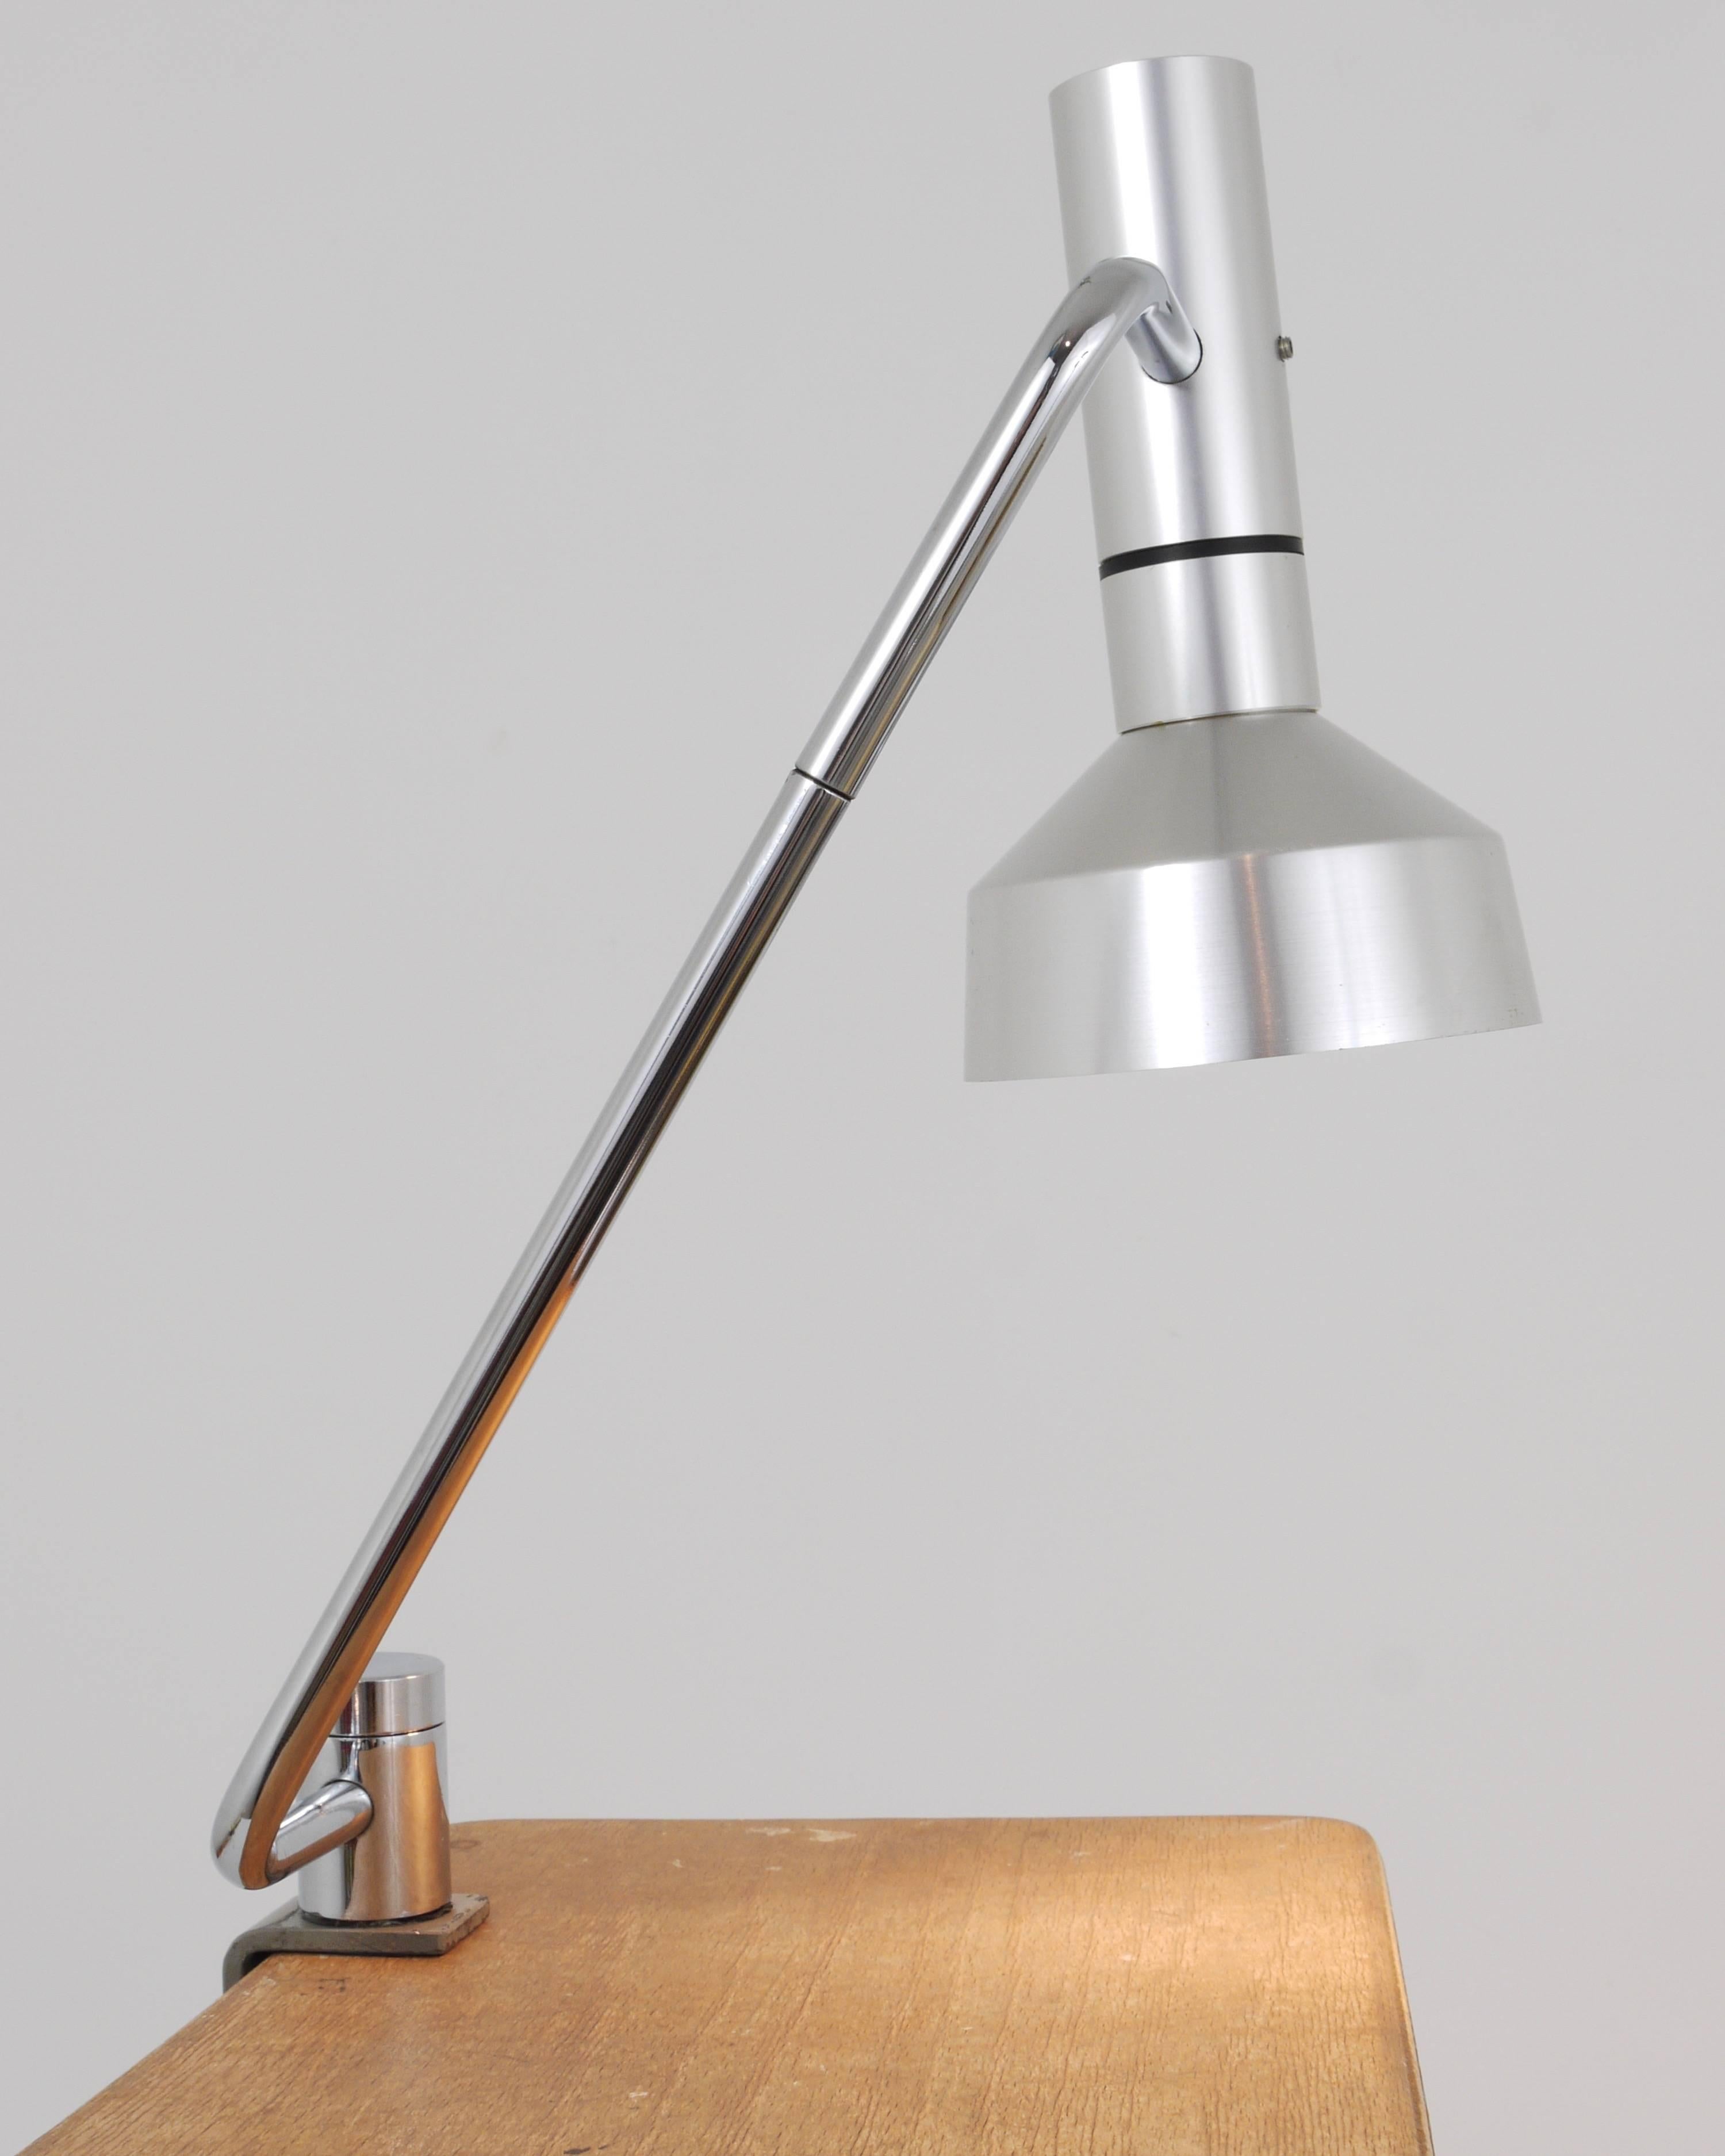 A beautiful table clamp lamp, designed by Rico & Rosemarie Baltensweiler, manufactured by Baltensweiler AG, Ebikon, Switzerland, in the 1960s. It has a chrome-plated neck with a brushed aluminium lampshade and a big white switch on the lampshades